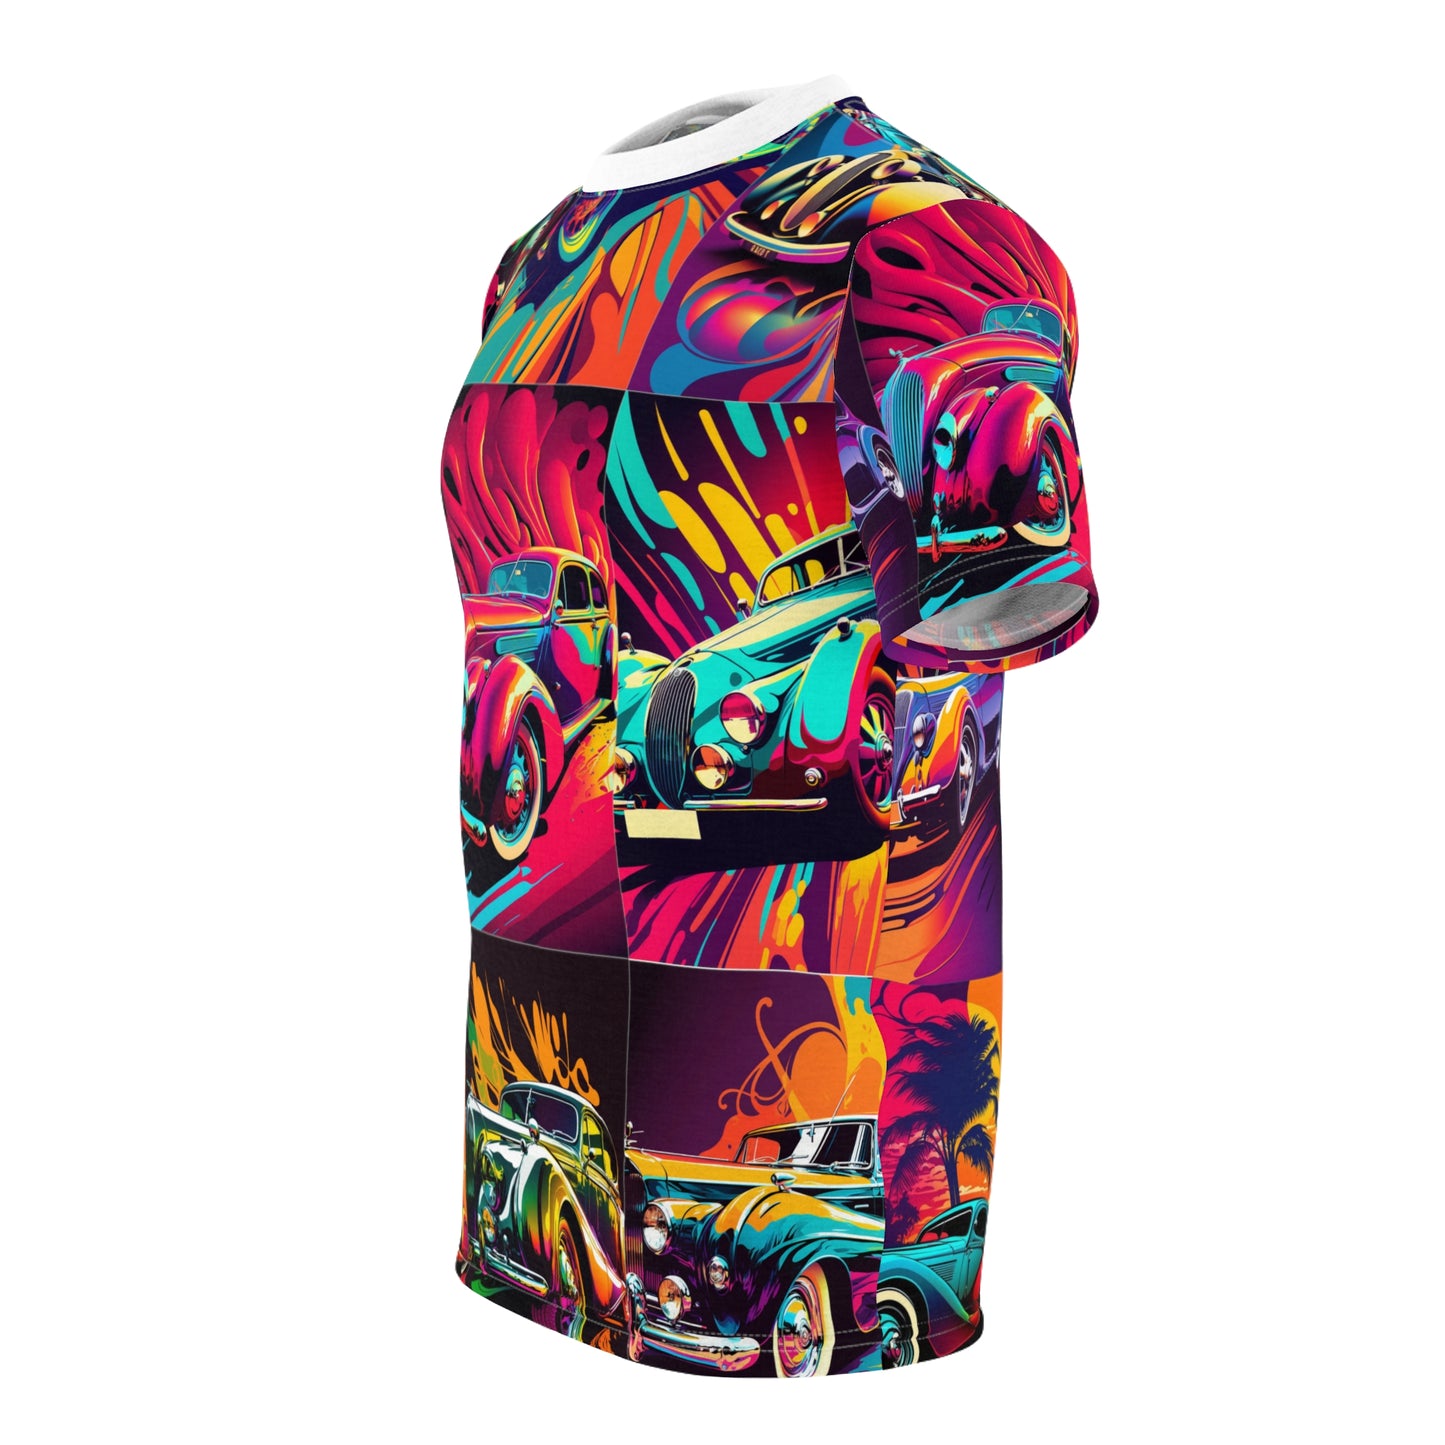 Abstract Style, Classic Cars, Retro Cars, Unisex Cut & Sew Tee